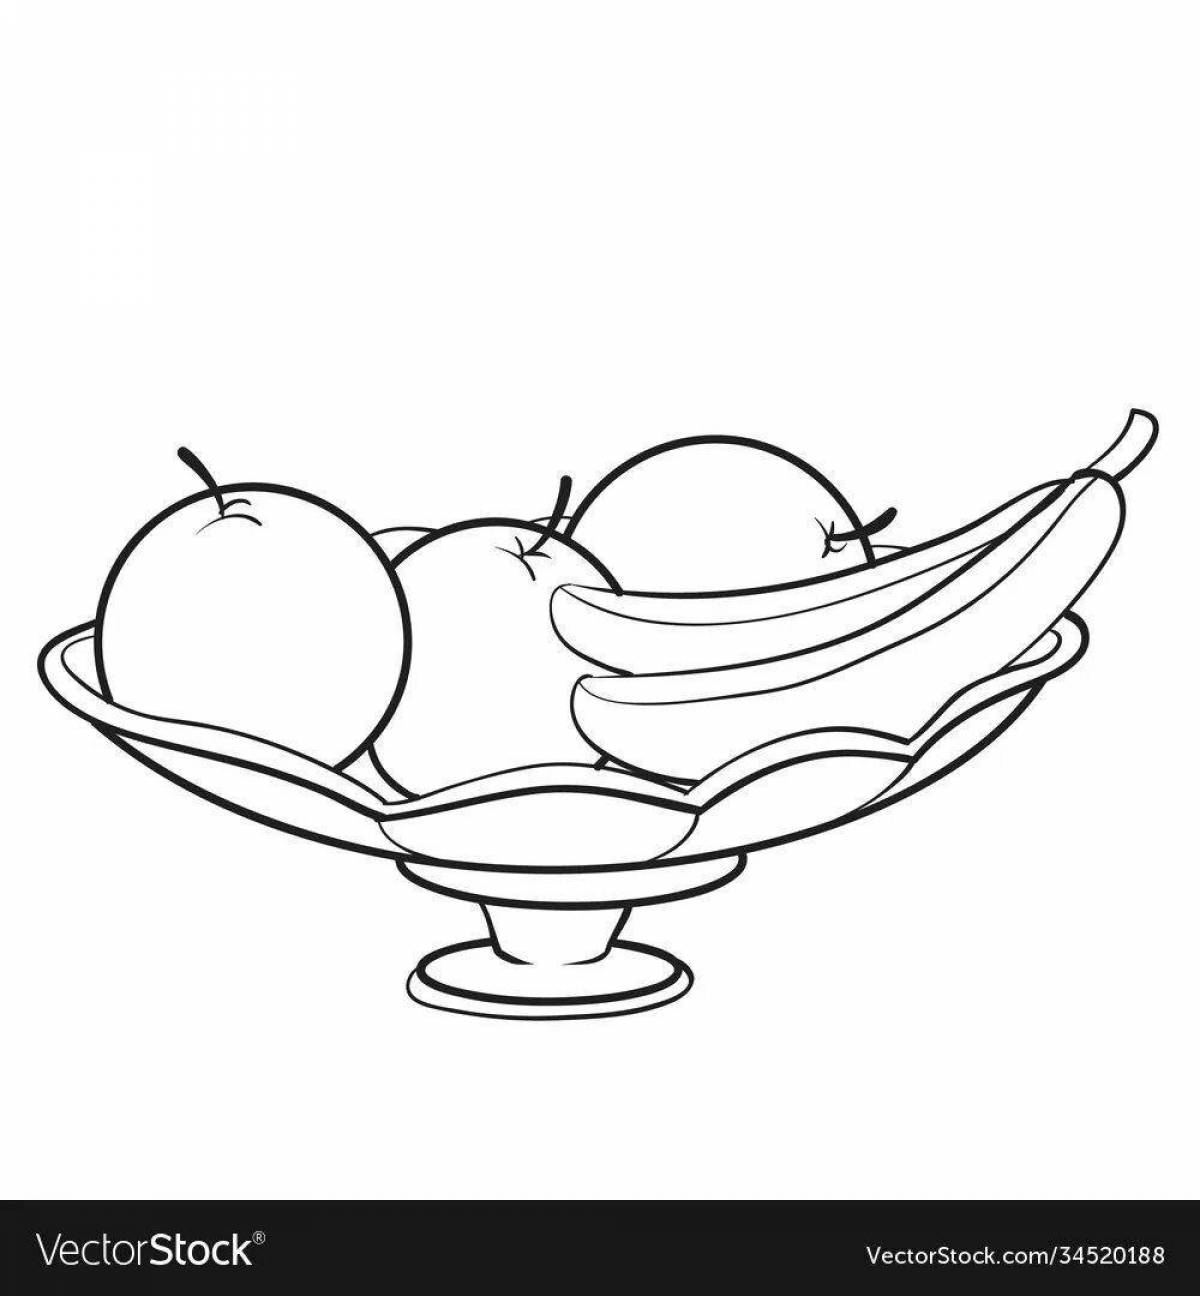 Adorable empty fruit bowl coloring book for kids